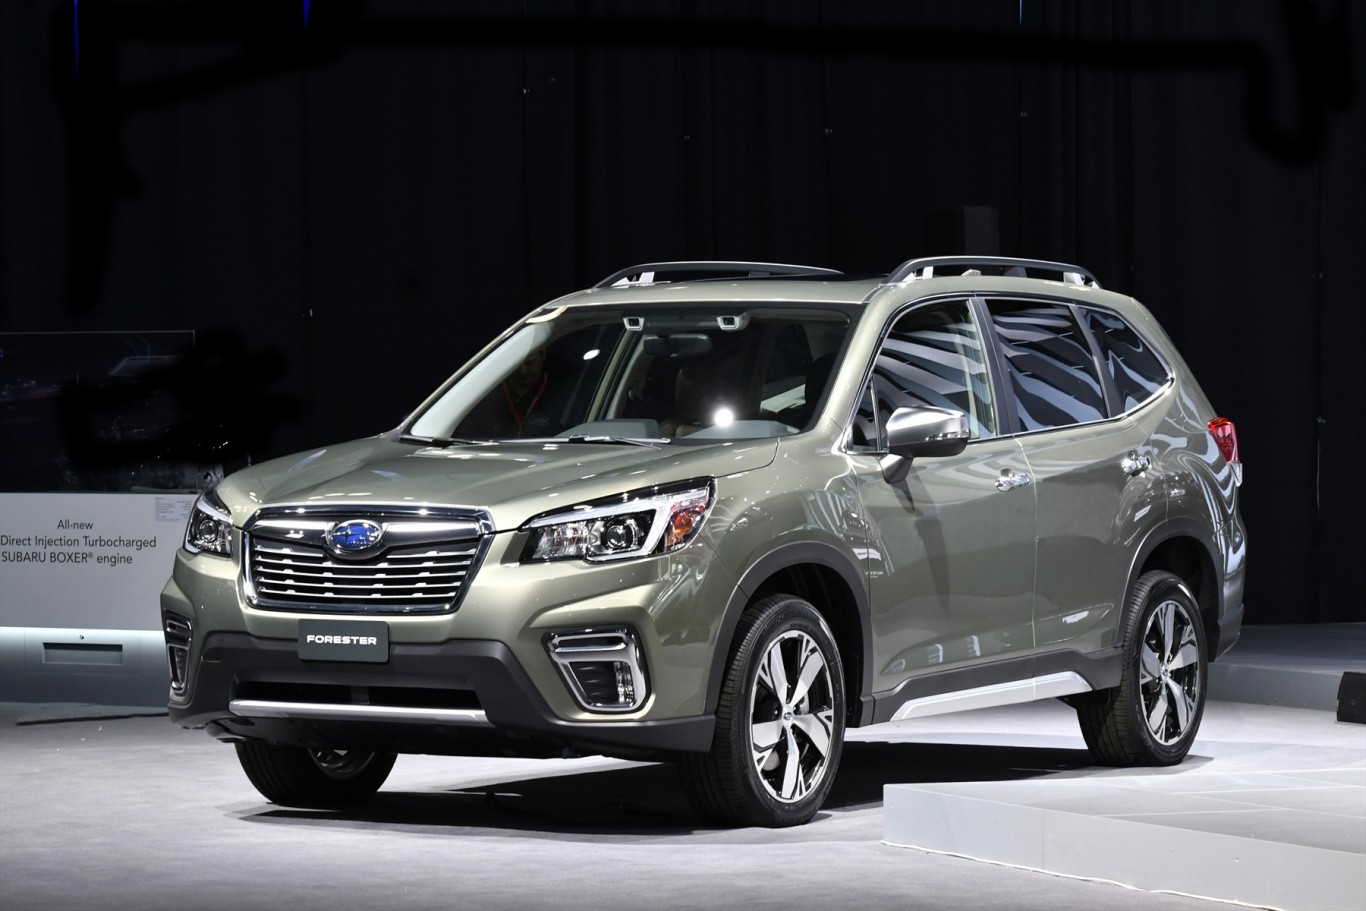 World Premiere Of The All-New 2019 Forester At New York International Auto Show